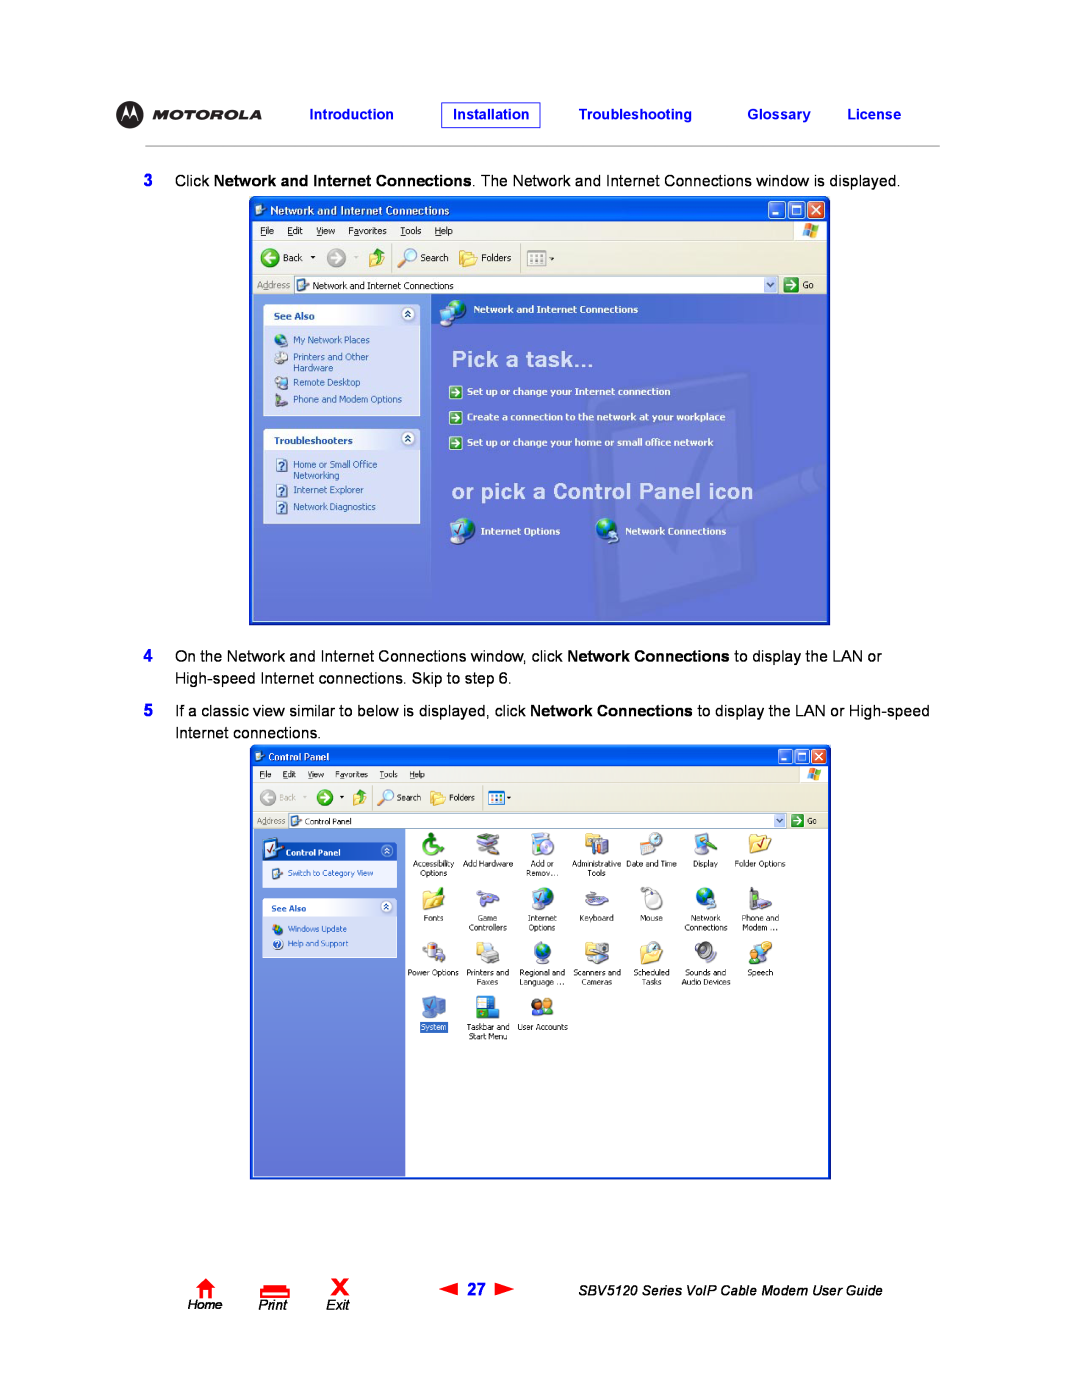 Motorola SBV5120 manual Click Network and Internet Connections. The Network and Internet Connections window is displayed 